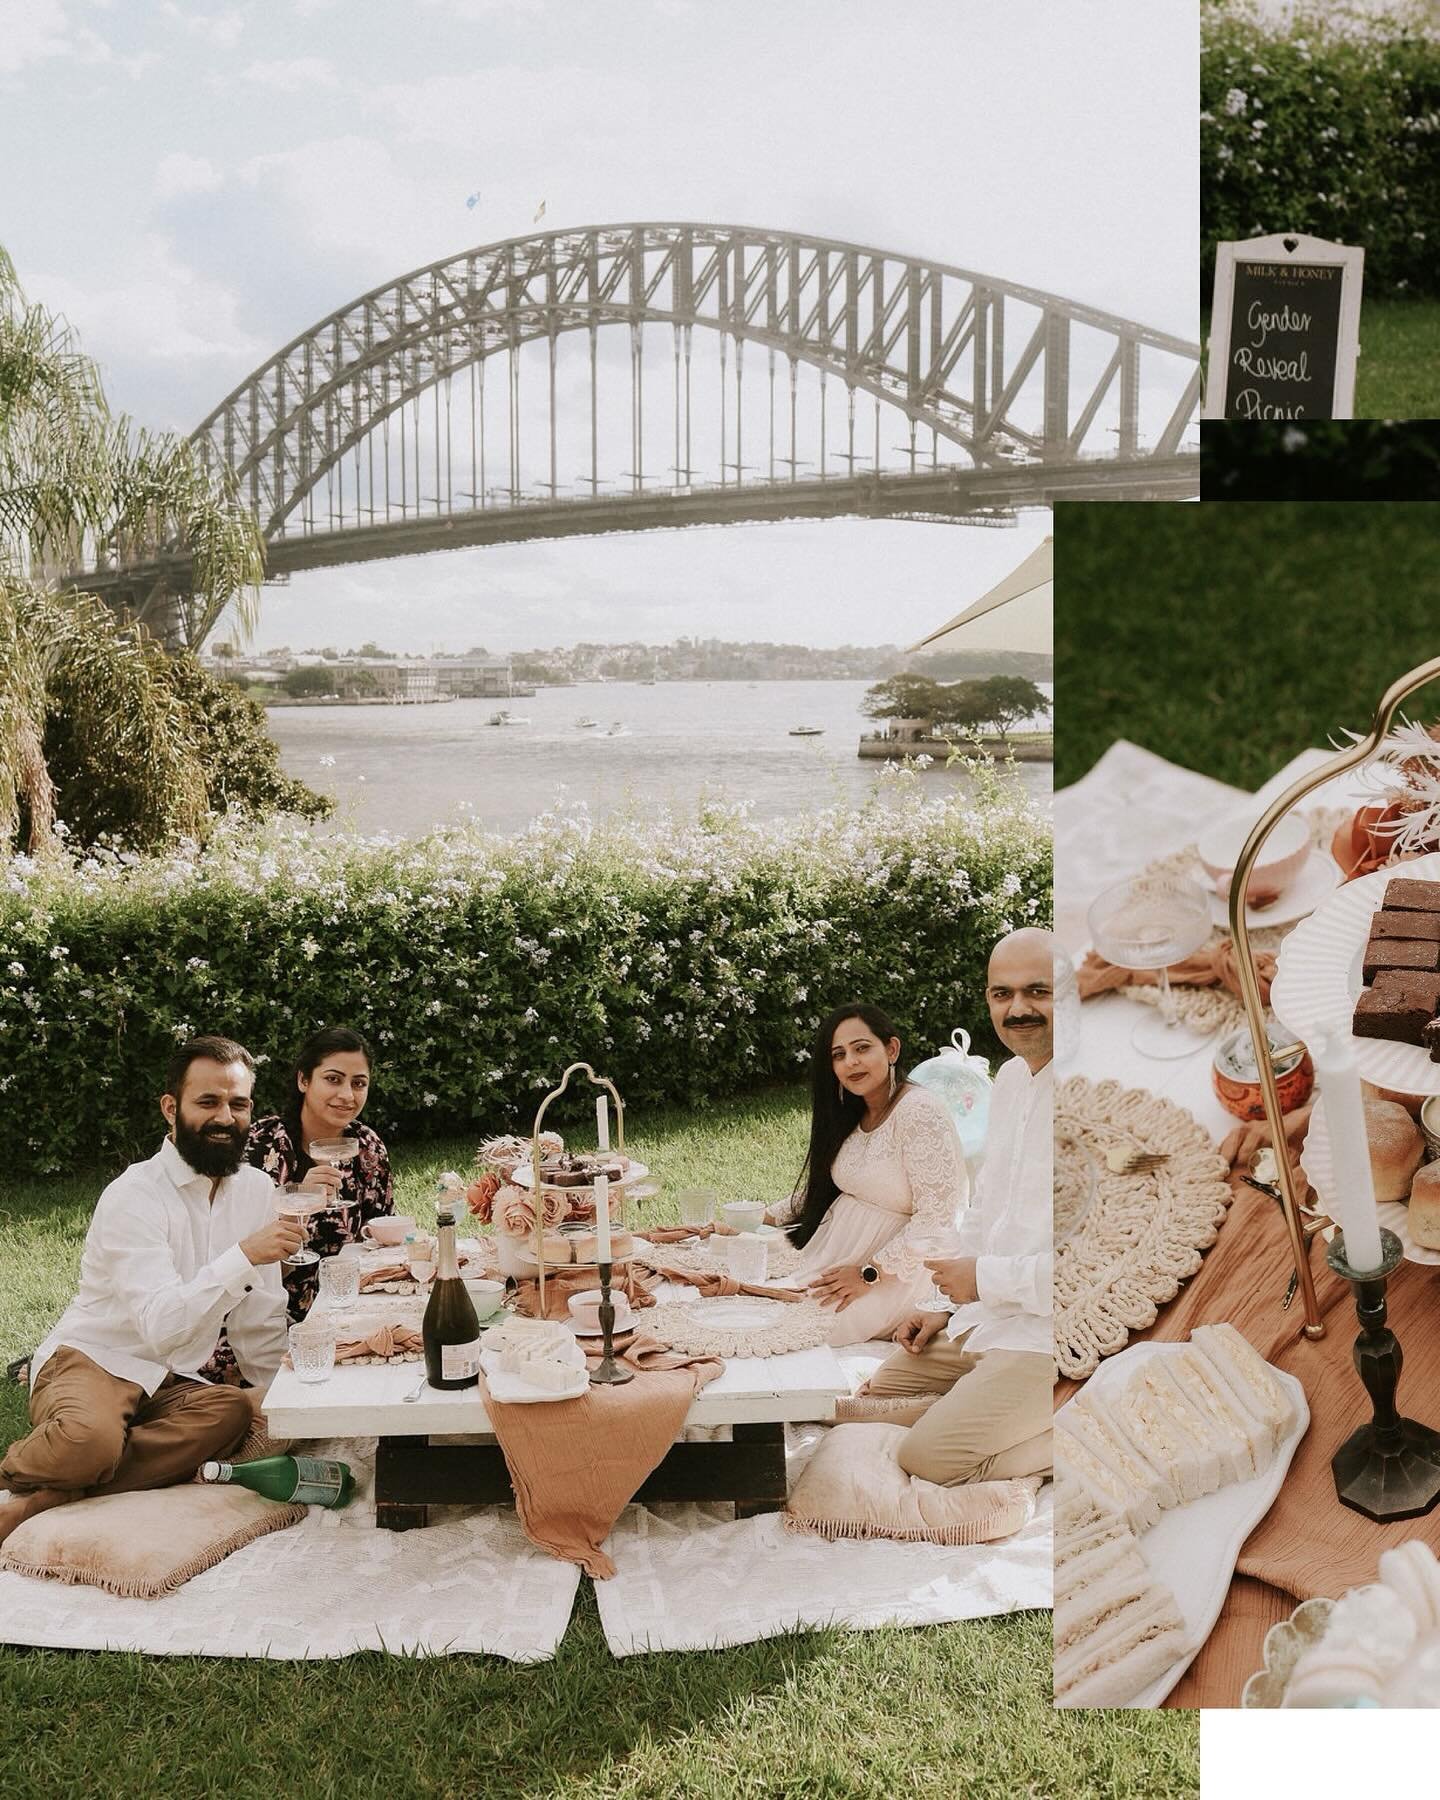 Our weekend was full of gender reveals! What a fun celebration. Pics by @martinepaynephotography 

#genderreveal #genderrevealparty #picnic #hightea #highteaparty #sydney #sydneyharbour #event #babyshower #babyshowerideas